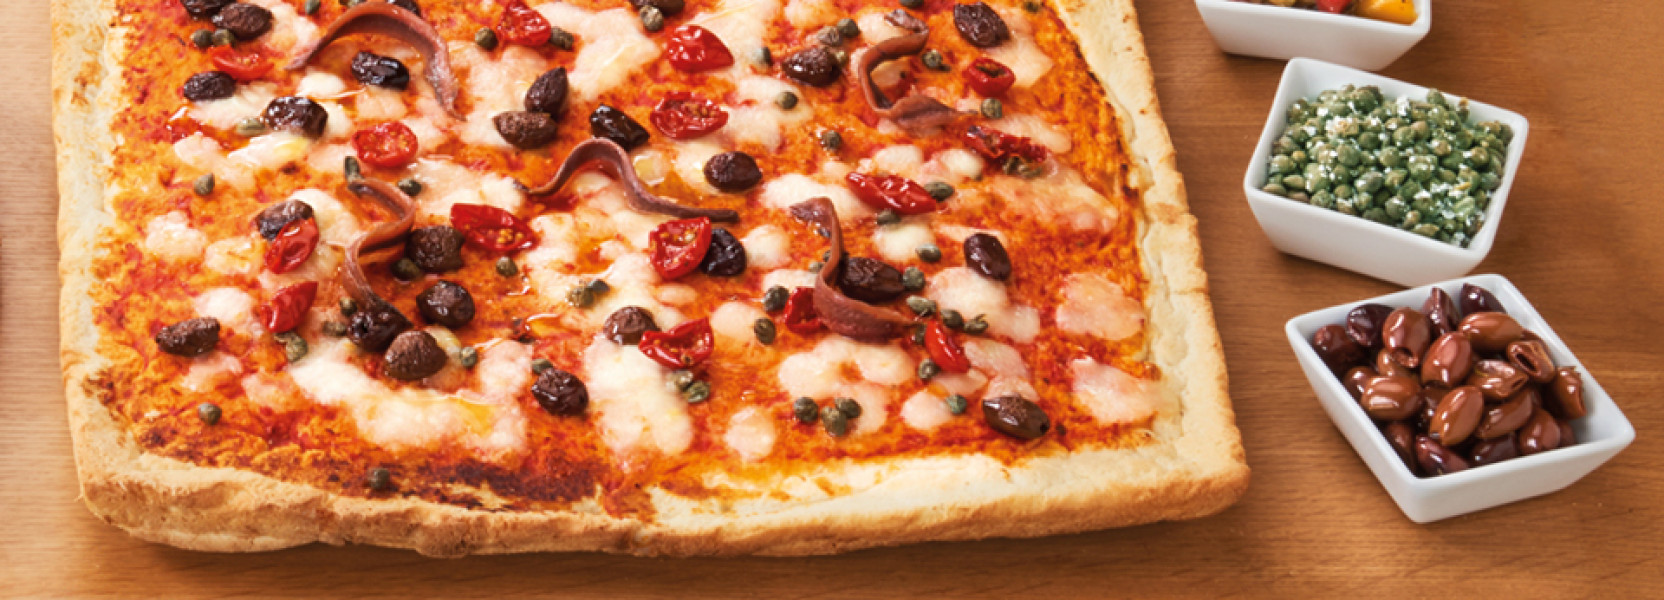 PIZZA WITH OLIVES, CAPERS, ANCHOVIES AND DORATI TOMATOES